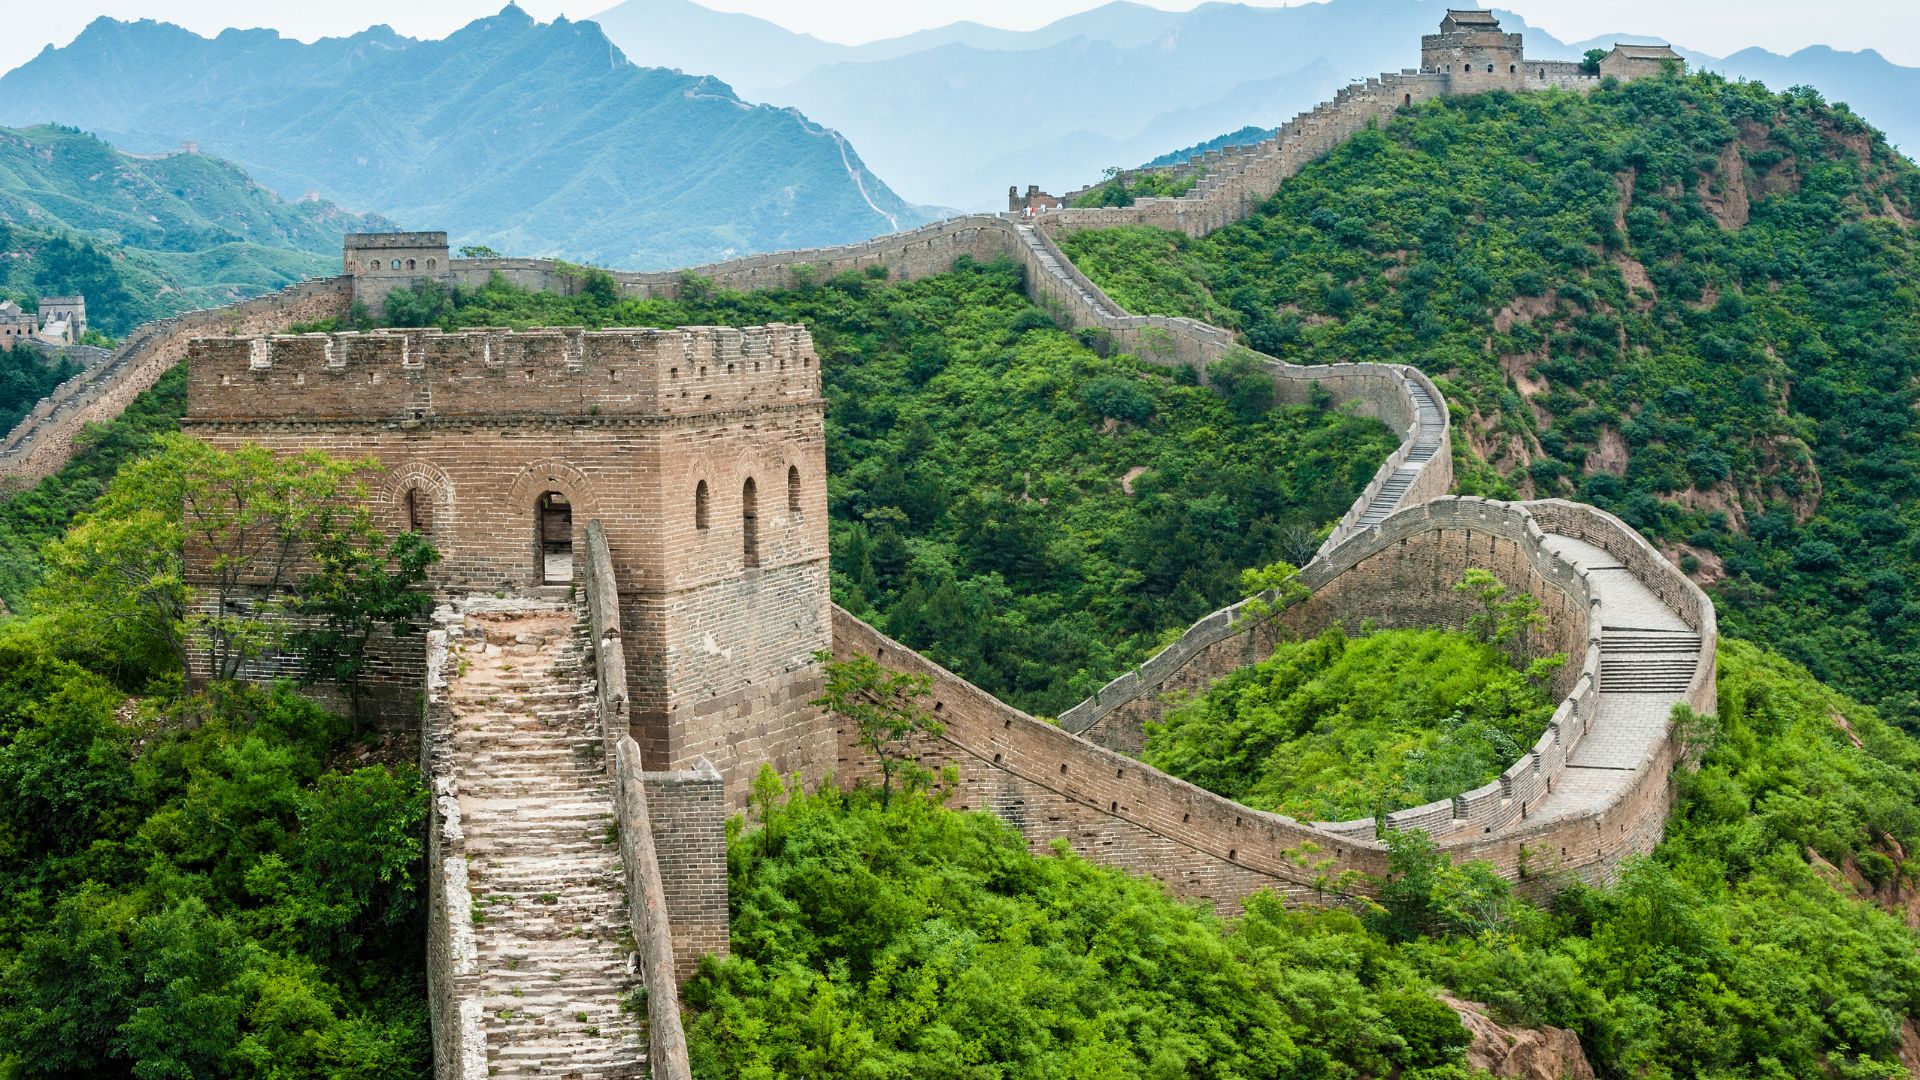 A Short Introduction to The Great Wall of China